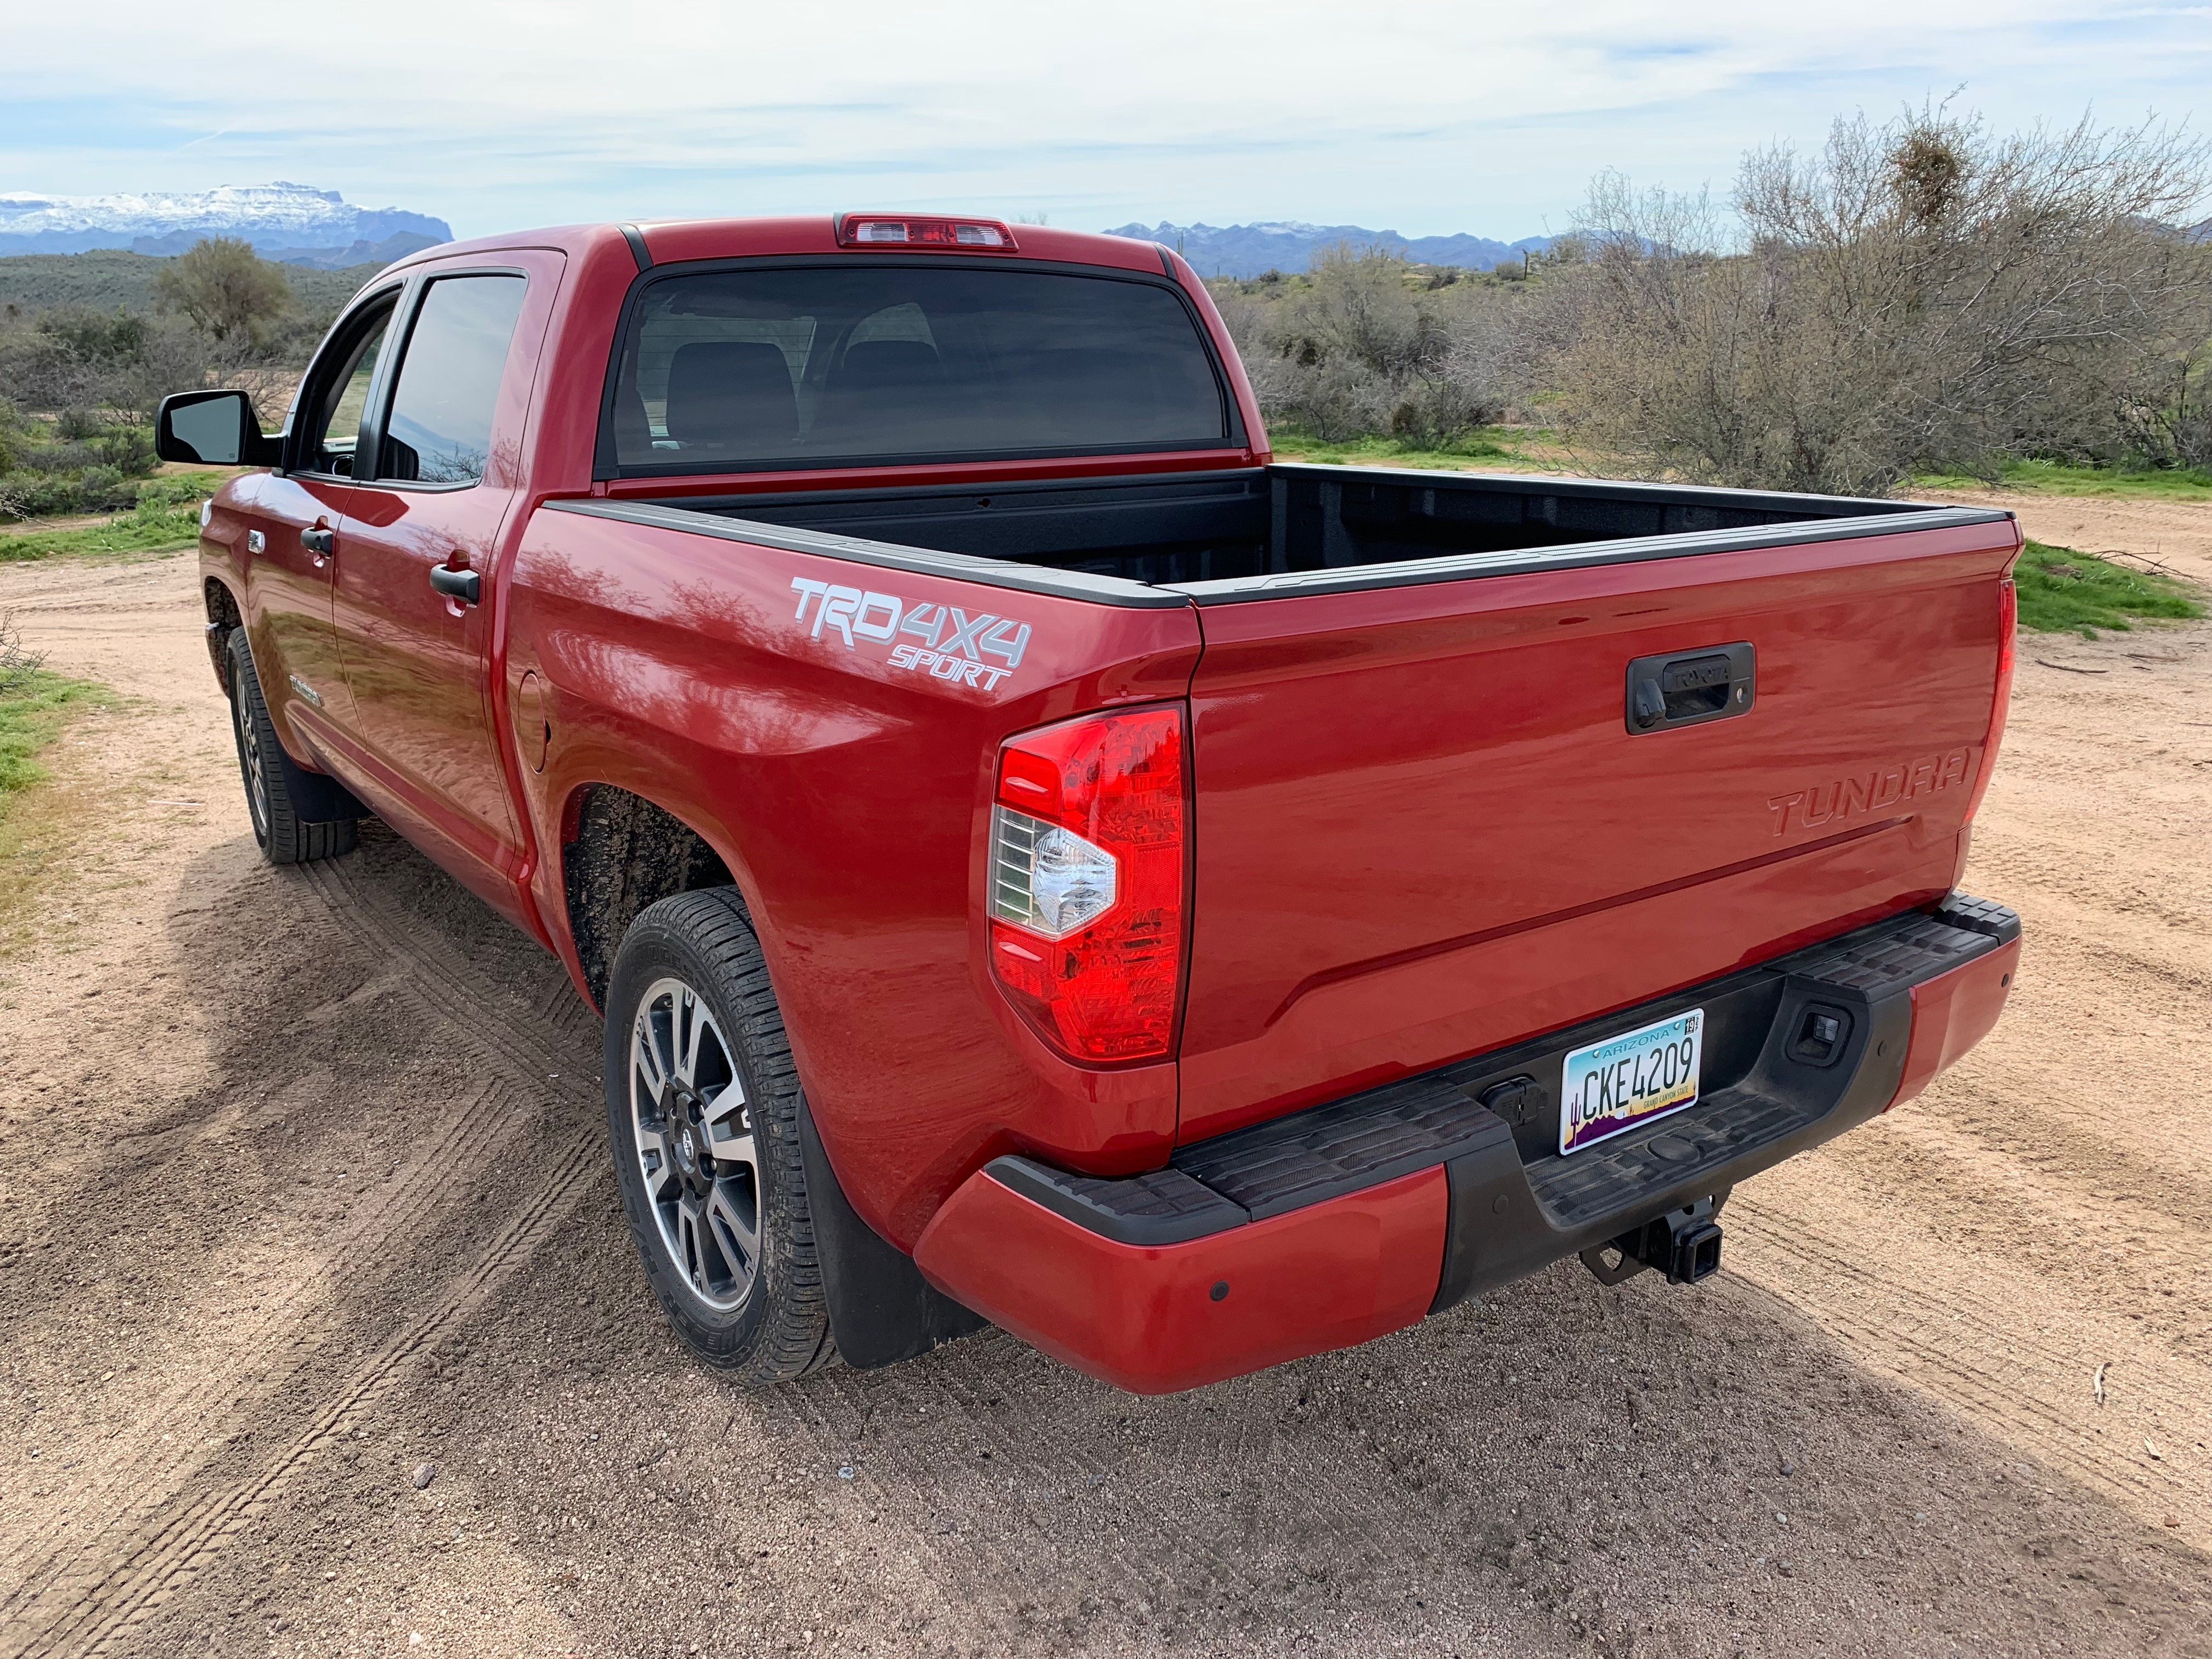 The 2019 Toyota Tundra is a workhorse truck, but it's starting to lose ground on its competition. | Carter Nacke photos